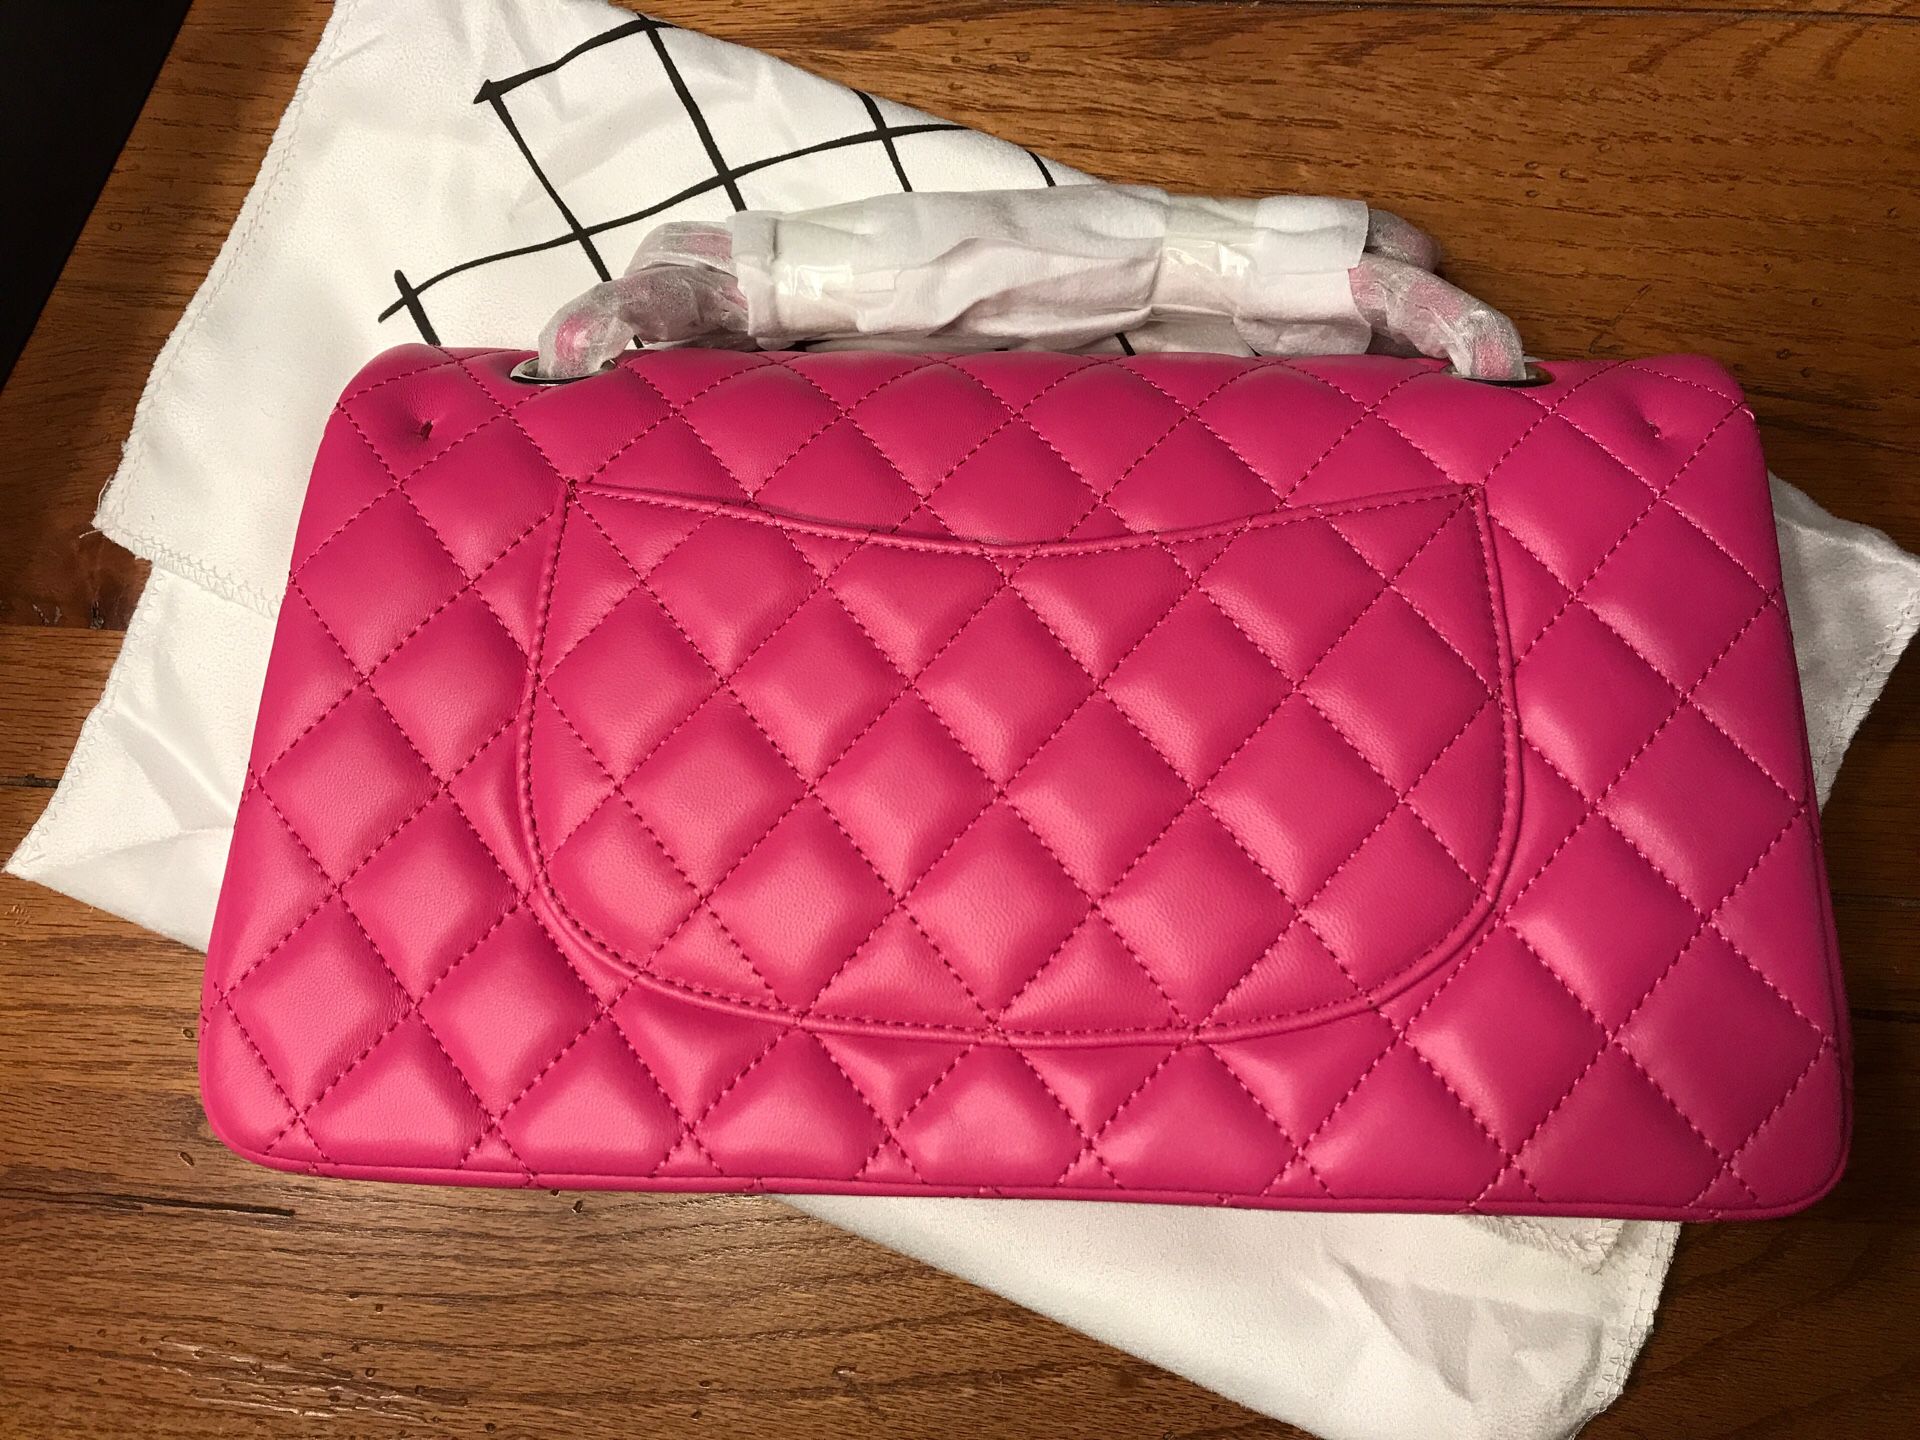 Chanel Classic Lambskin Double Flap Quilted Medium size Fuchsia